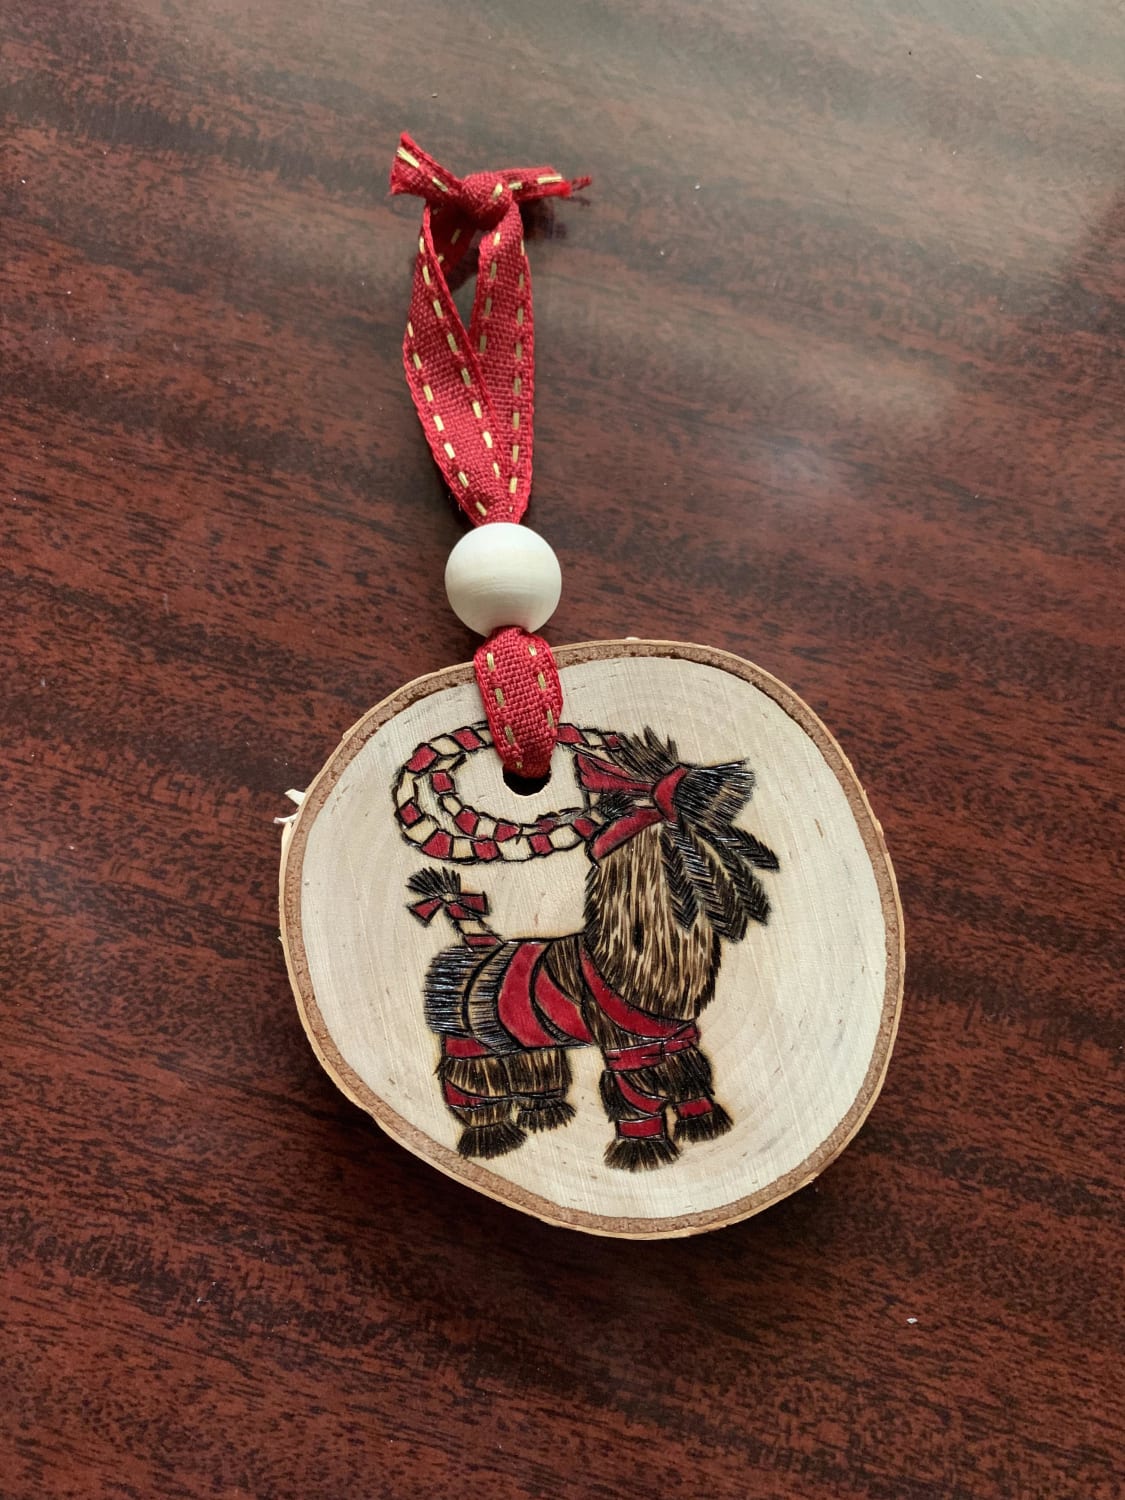 A gift from my friend’s mom - a Scandinavian Yule goat! She knows I’ve been studying paganism of my ancestral heritages (Scandinavian, Germanic, & French). The goat was made of the last bundle of grain from the harvest & saved for Yule celebrations as it was believed to contain the harvest’s spirit.